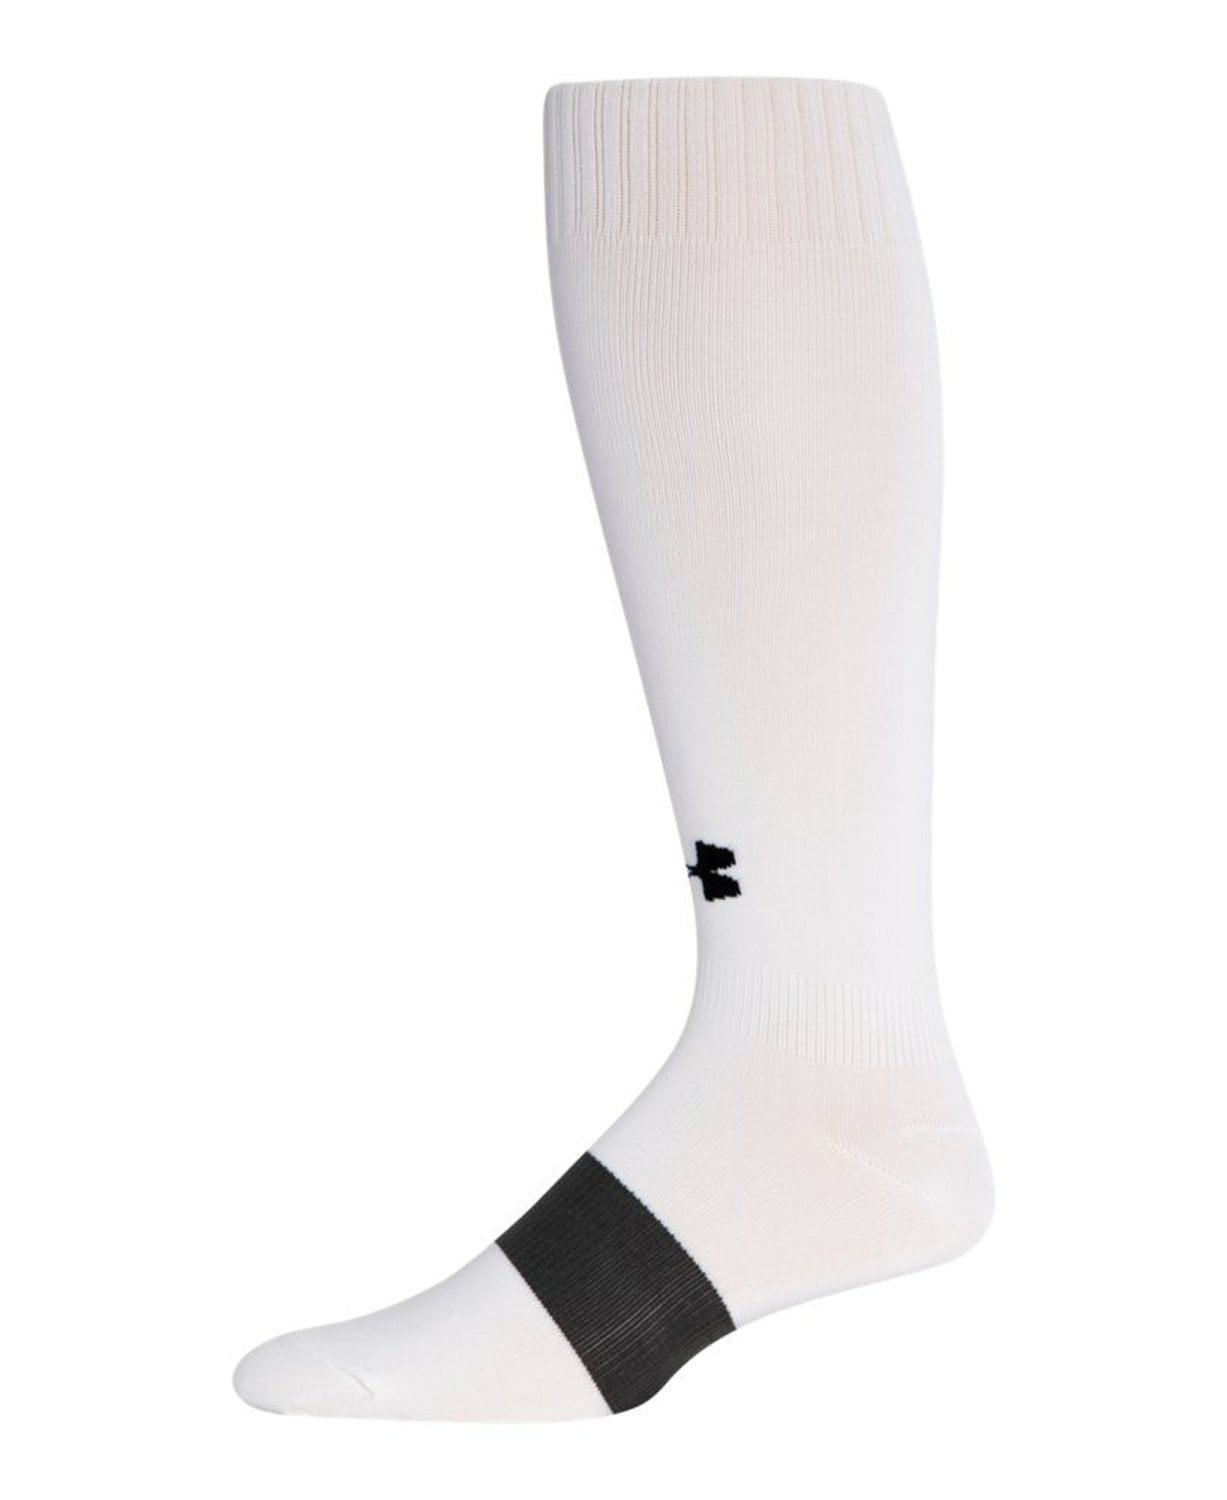 Large 2 Pair Under Armour  Team Over The Calf Socks